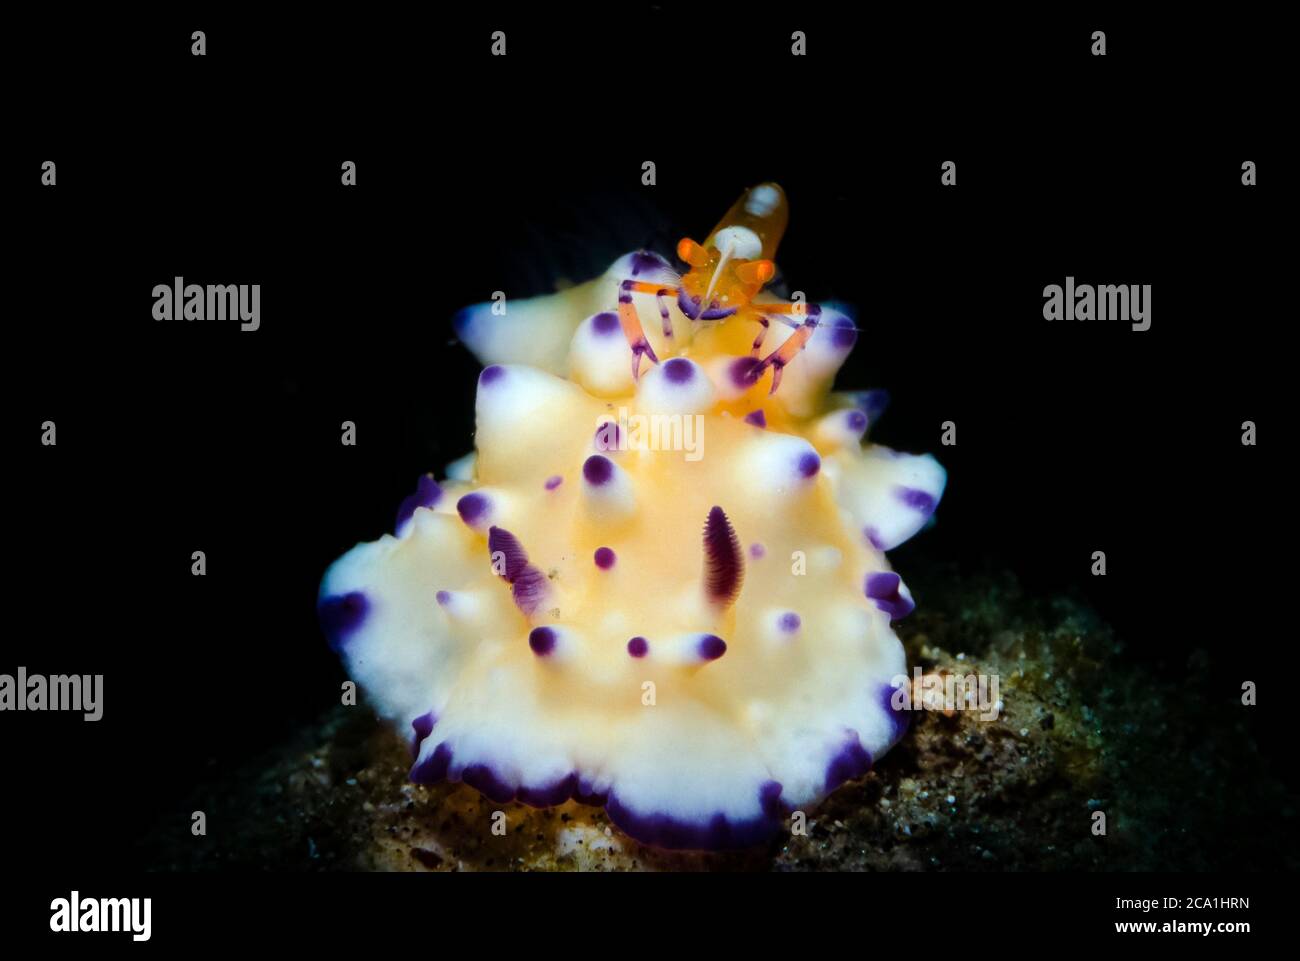 Emperor Shrimp, Periclimenes imperator, riding on an unidentified Nudibranch, Anilao, Philippines, Pacific Ocean Stock Photo